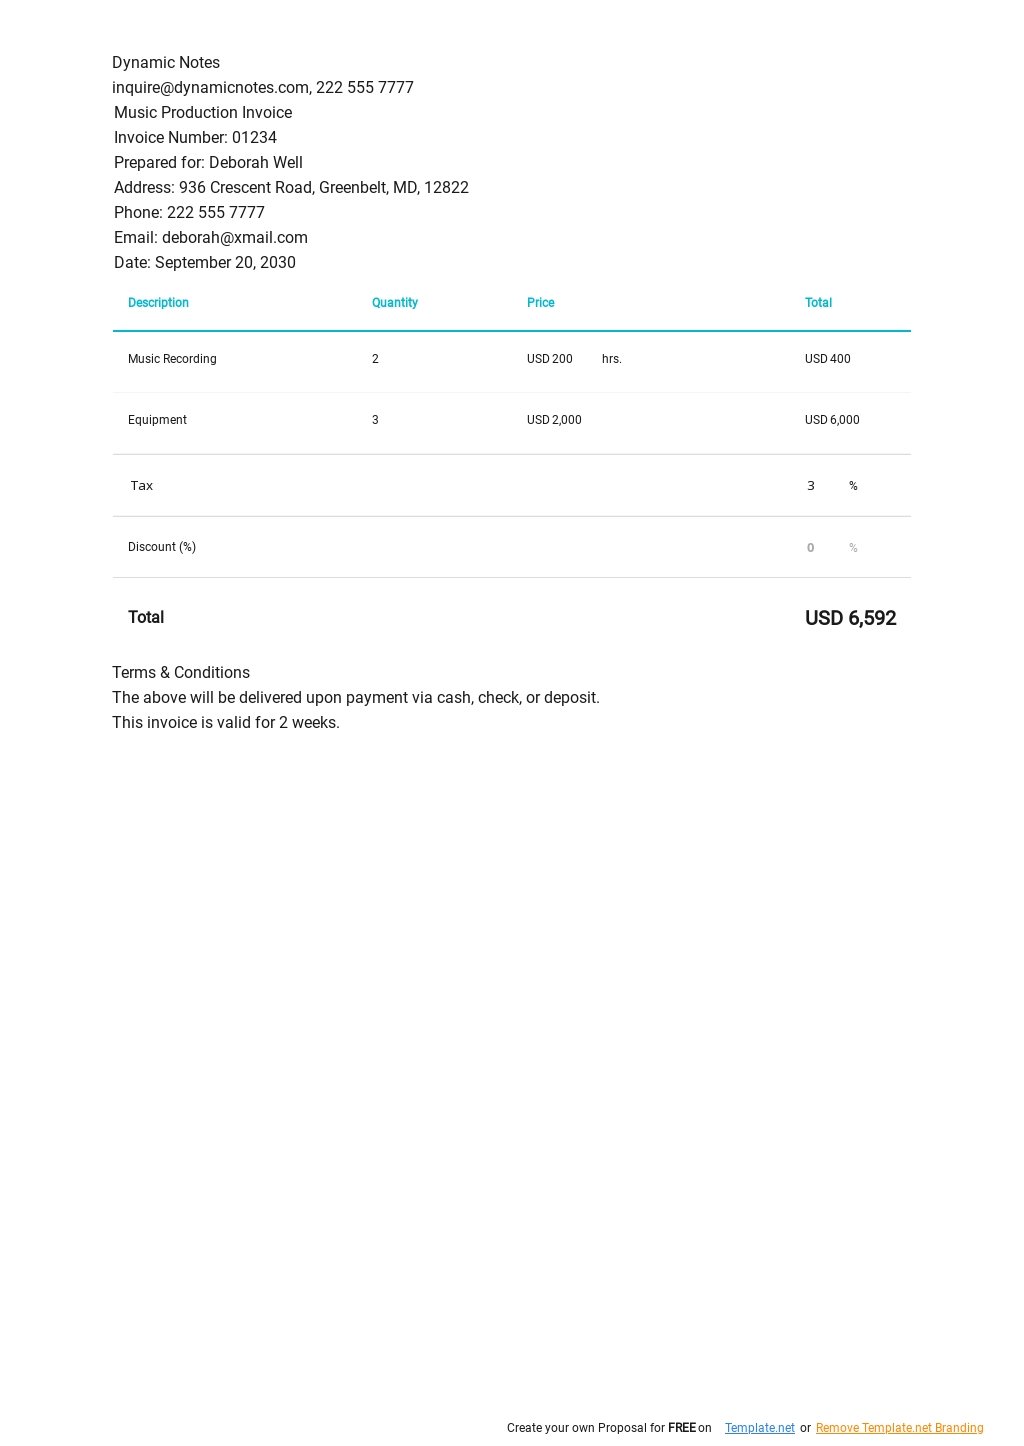 Music Production Invoice Template.jpe